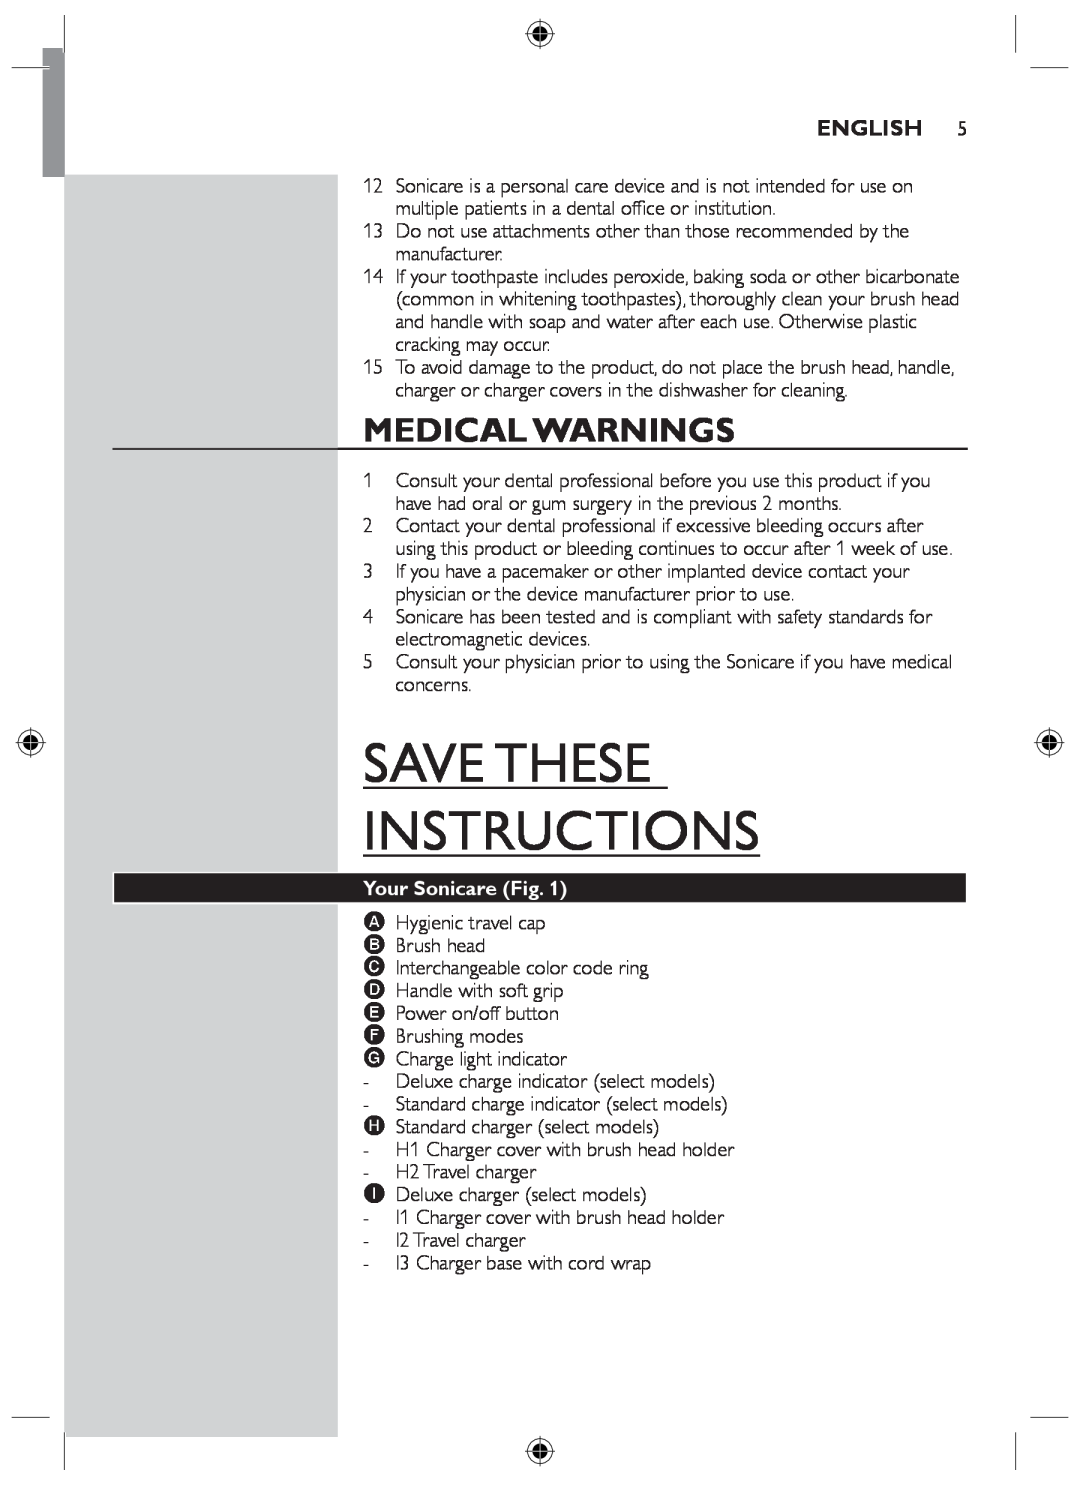 Philips HX6710 manual Medical Warnings, Your Sonicare Fig, Save These Instructions, English 